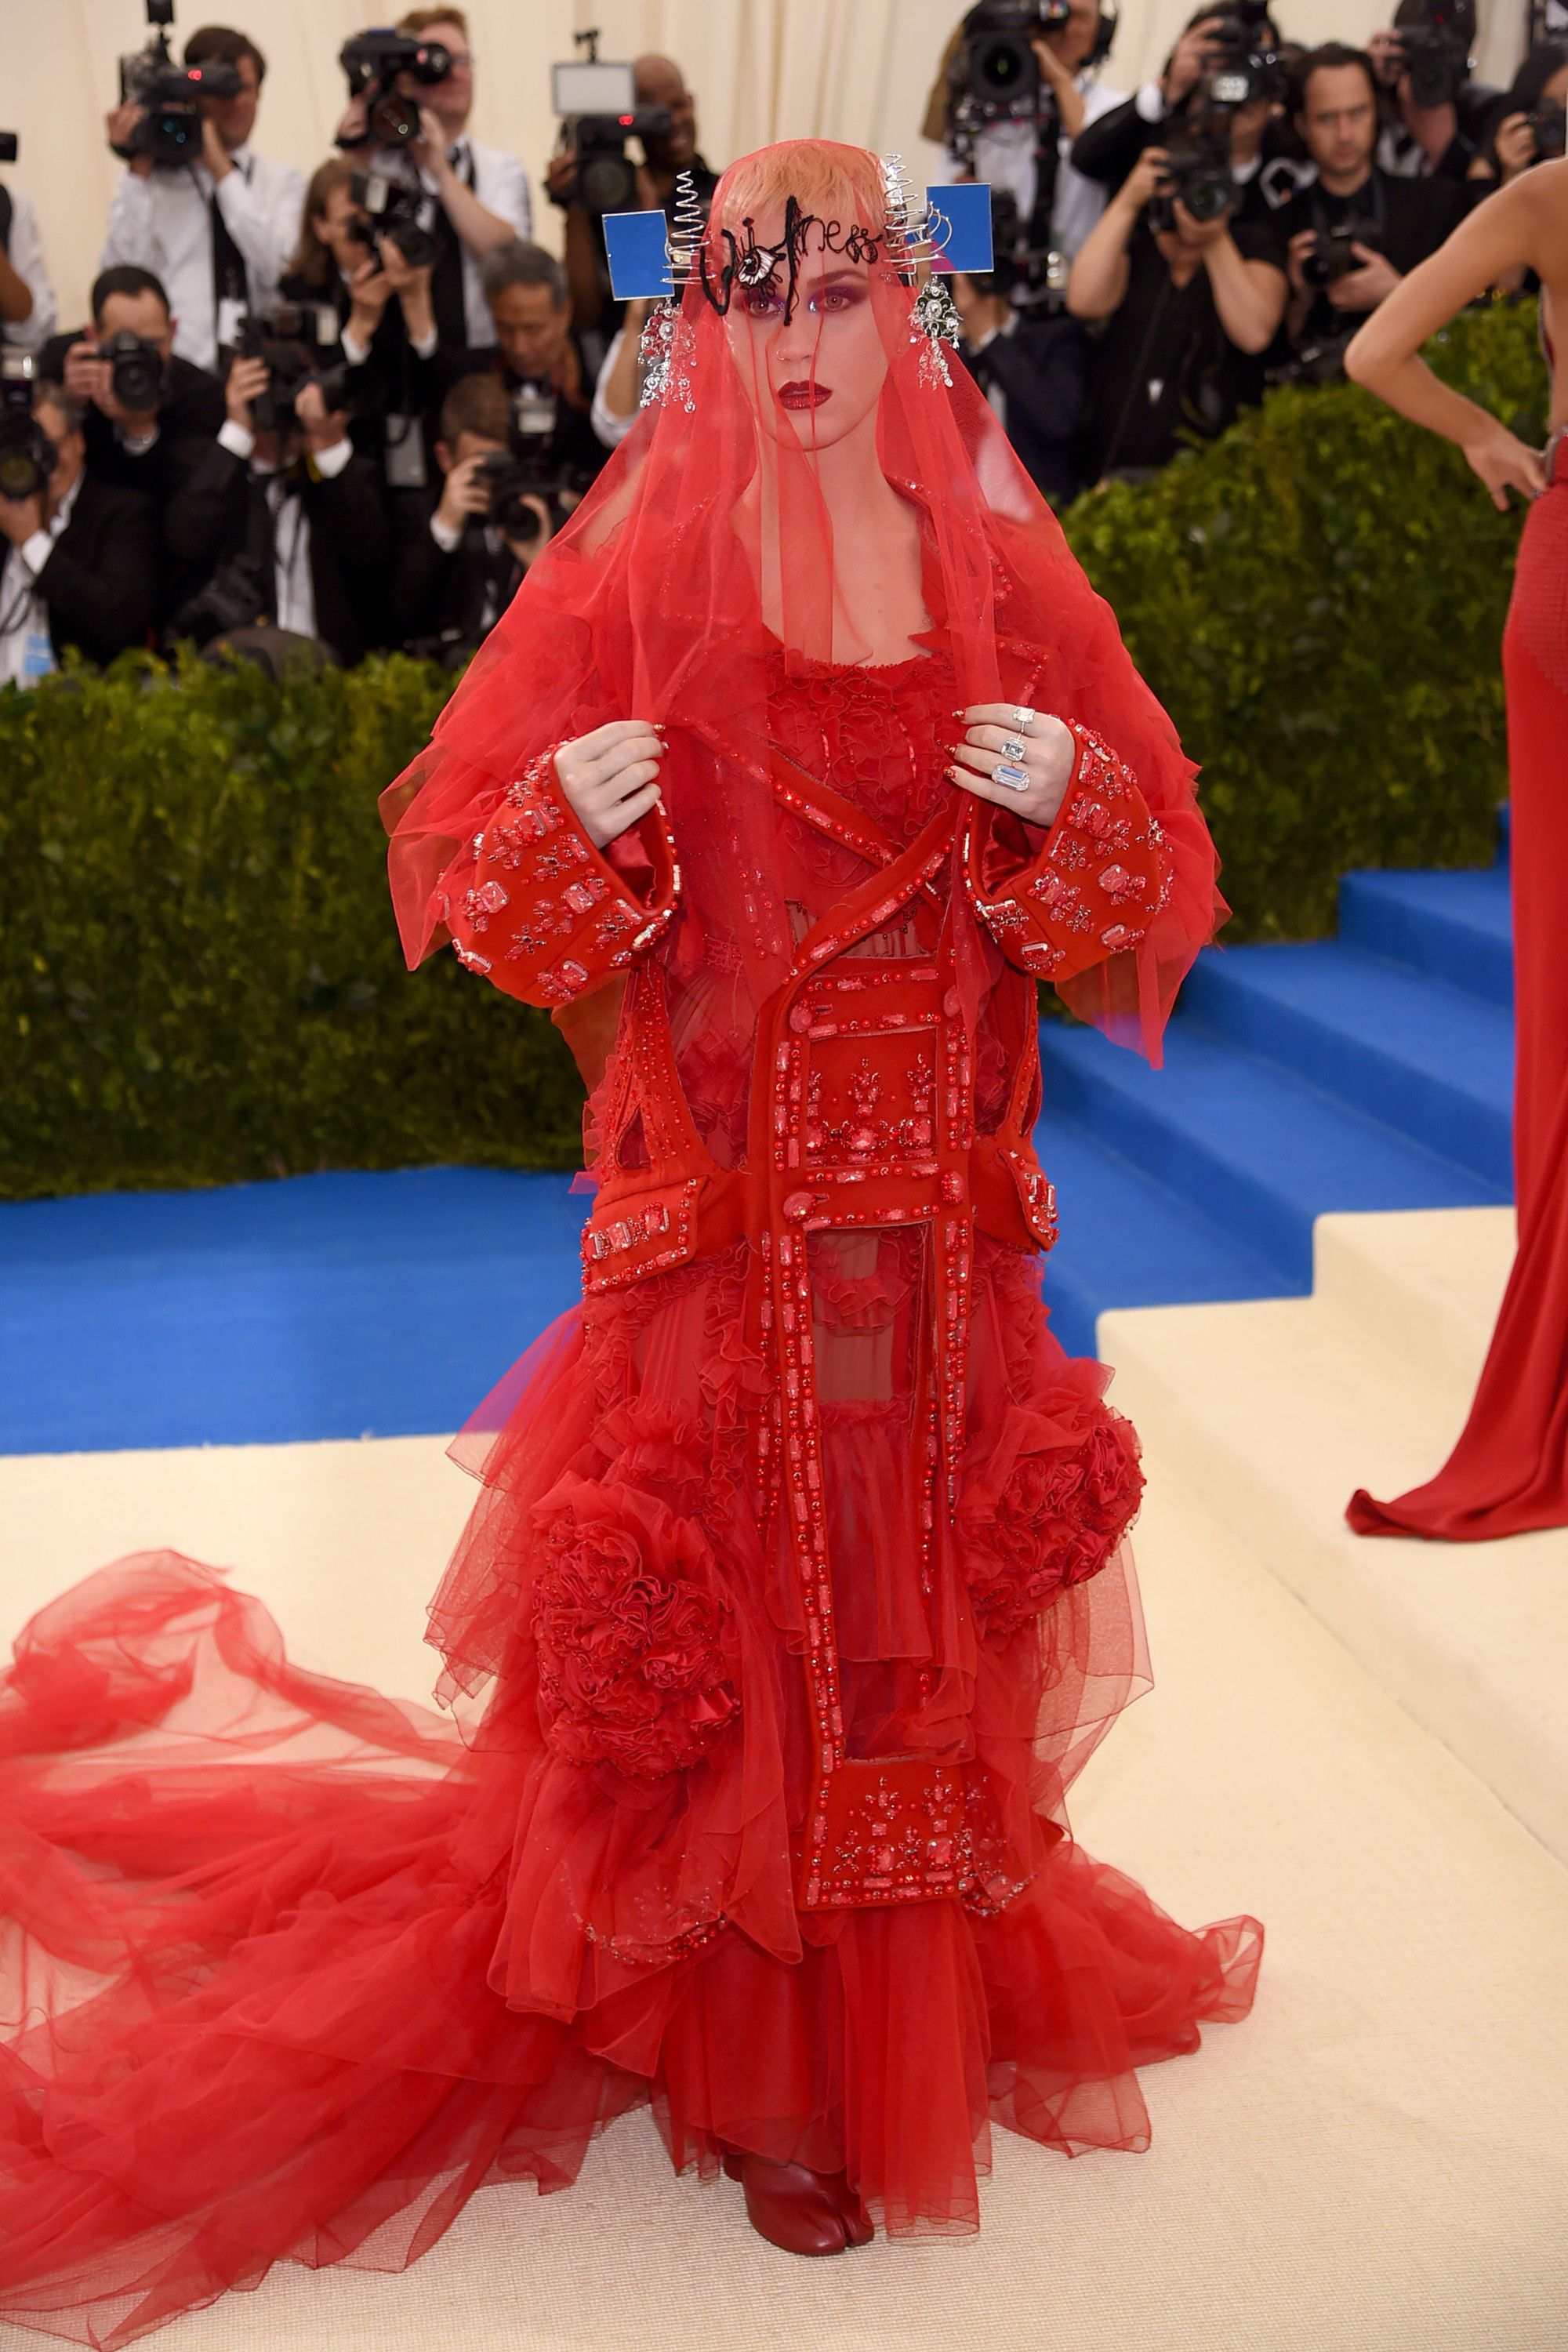 Most Outrageous Dresses On The Red ...